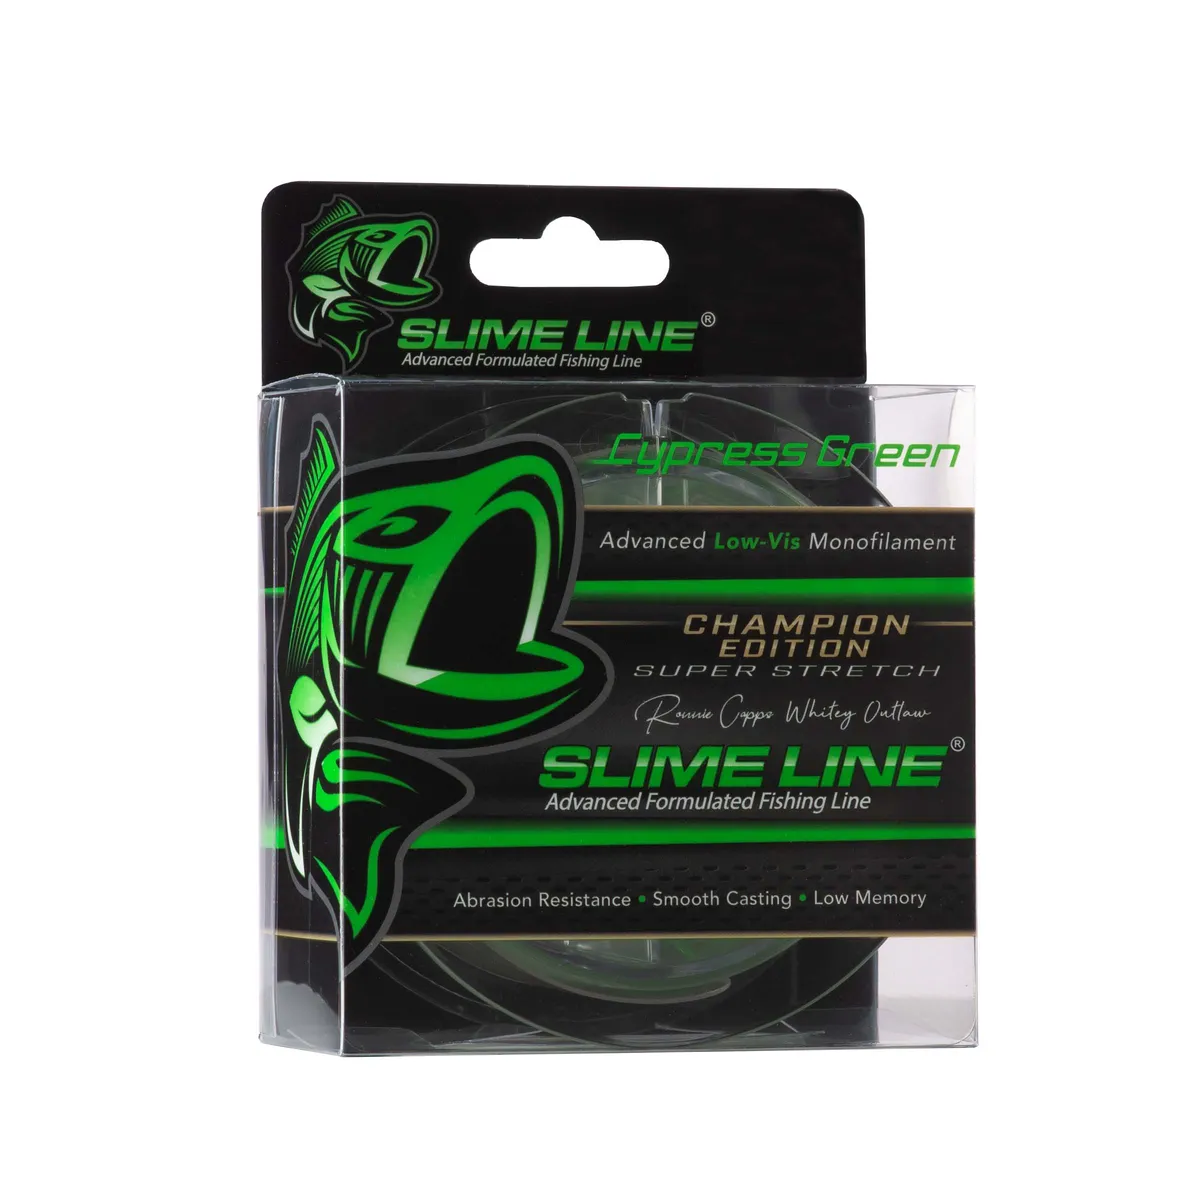 SLIME LINE HI-VIS GREEN 10LB 325YD MADE FOR CRAPPIE POLE FISHING GRIZZLY  JIG